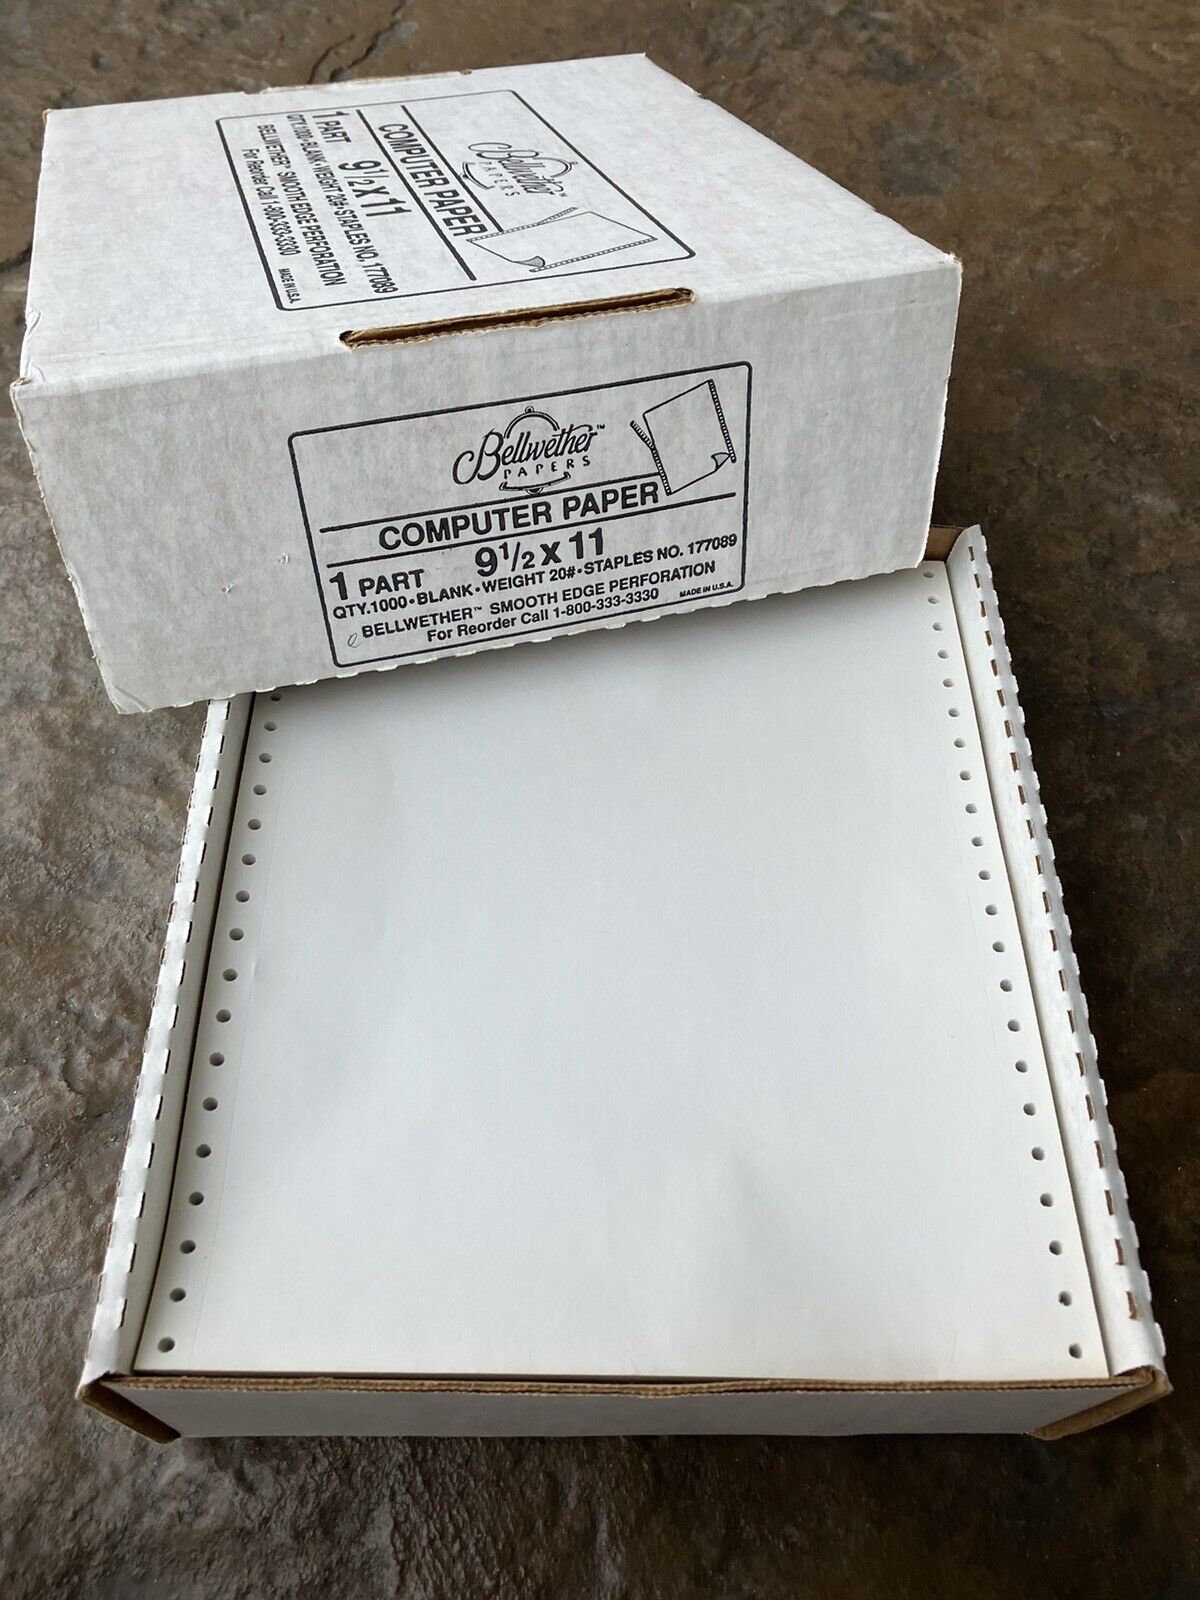 Vintage Printer Paper Continuous Dot Matrix Tractor Feed 9.5 x 11 20# Bellwether